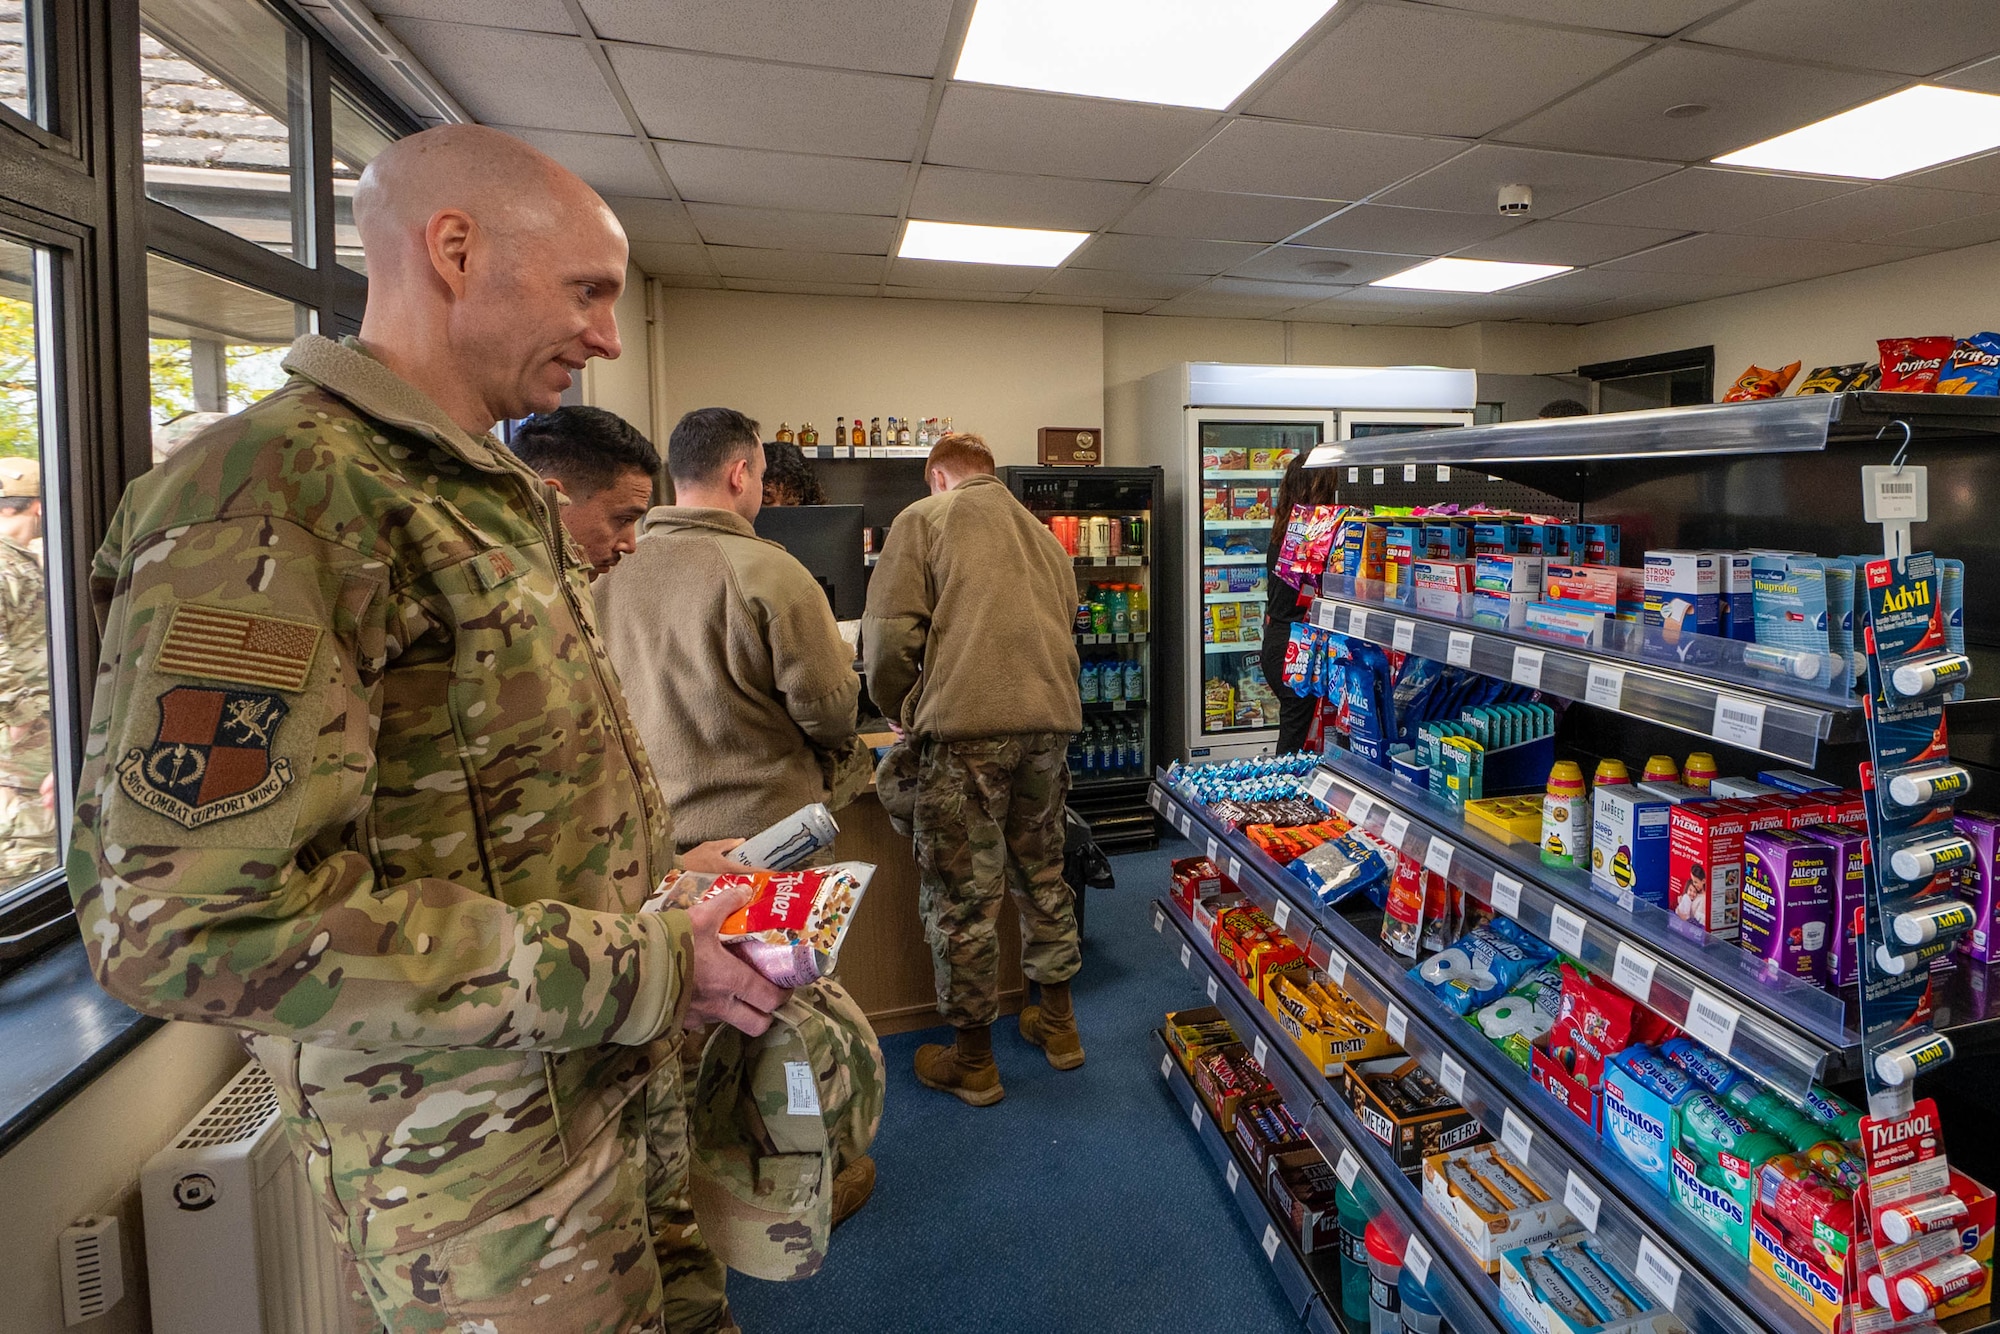 Airmen browse the shelves of the newly opened Mini-Mart